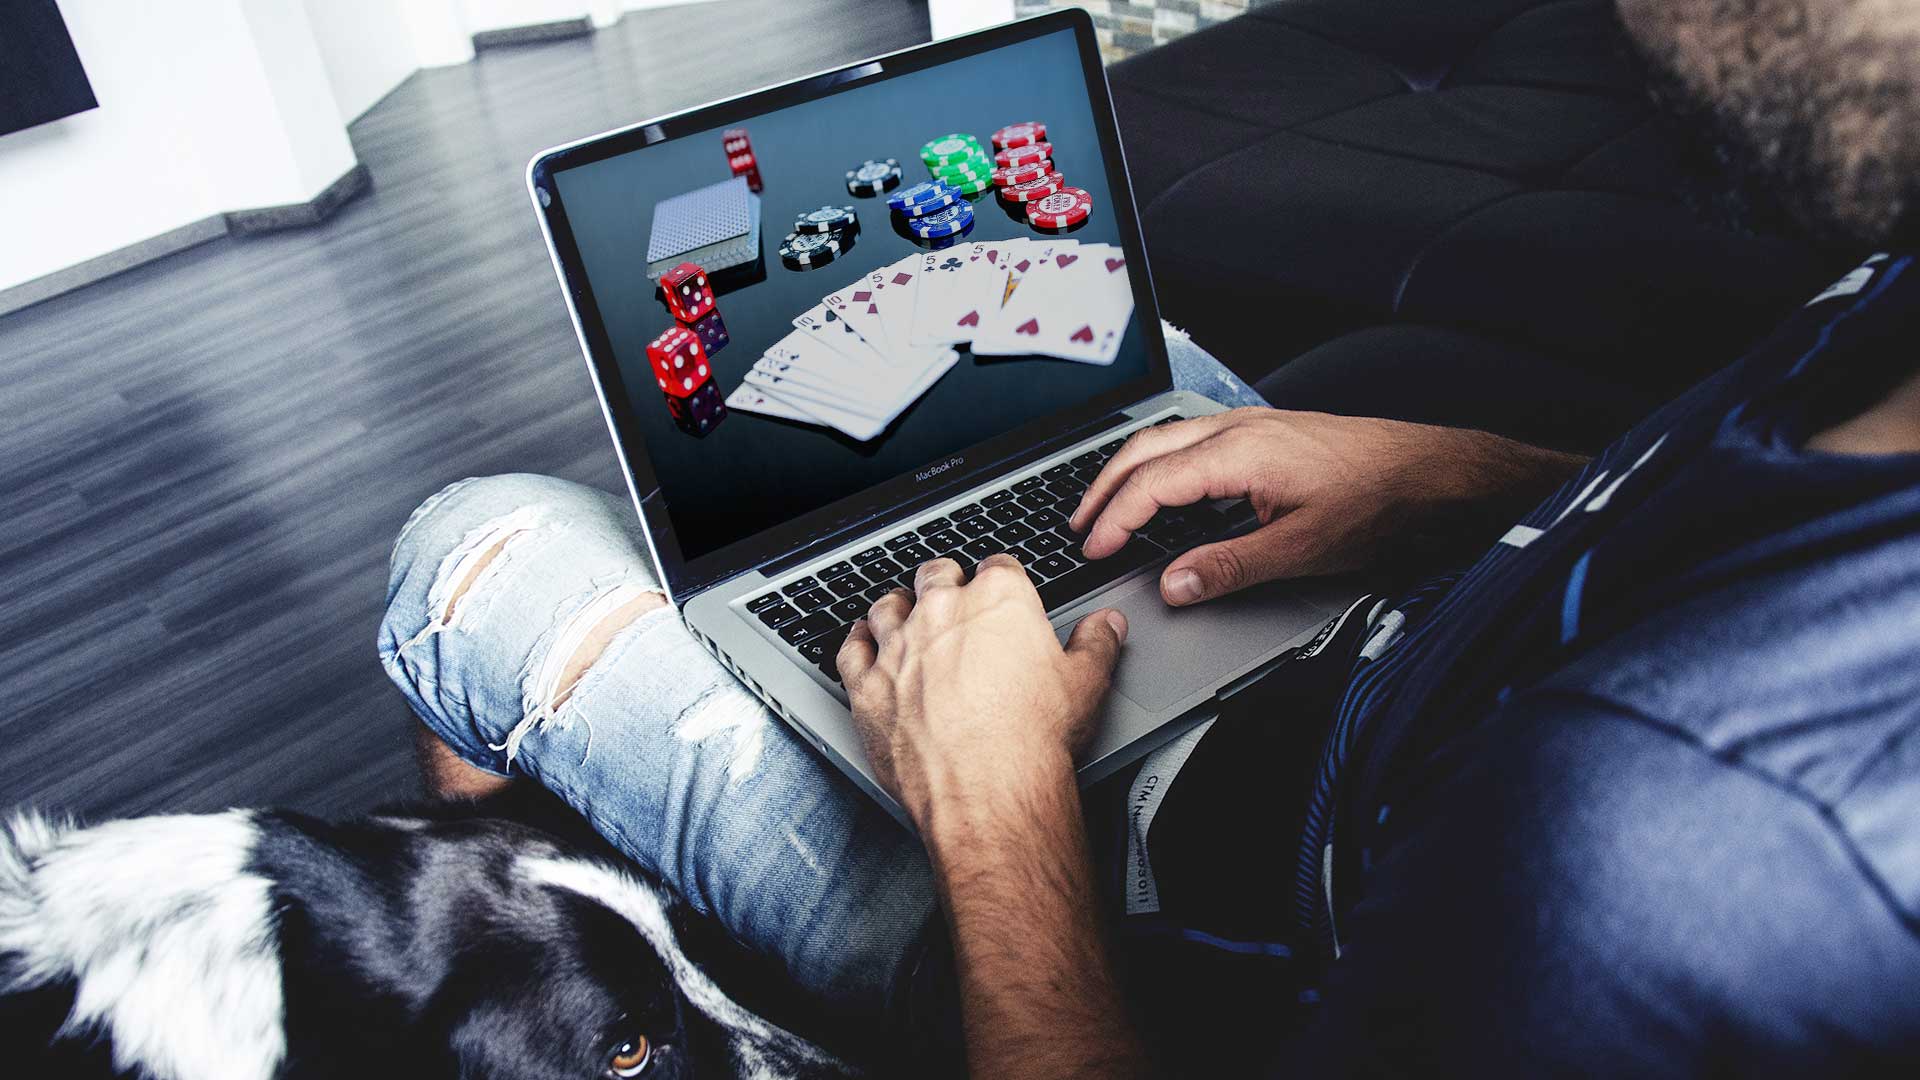 How data influences the biggest and best online casinos - Dazeinfo